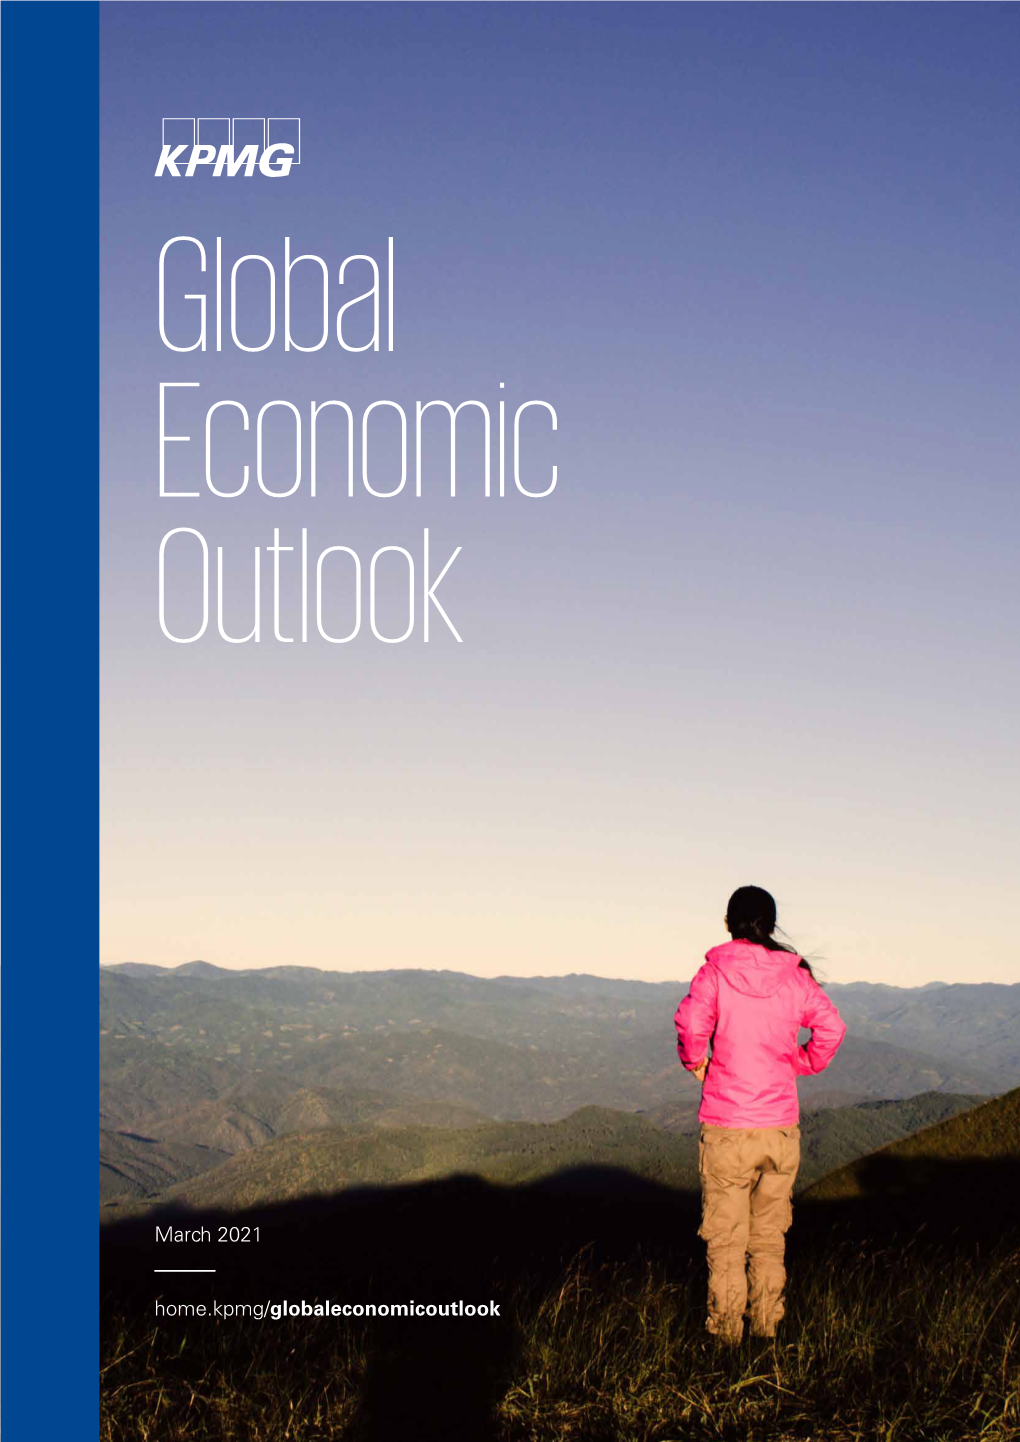 KPMG Global Economic Outlook March 2021